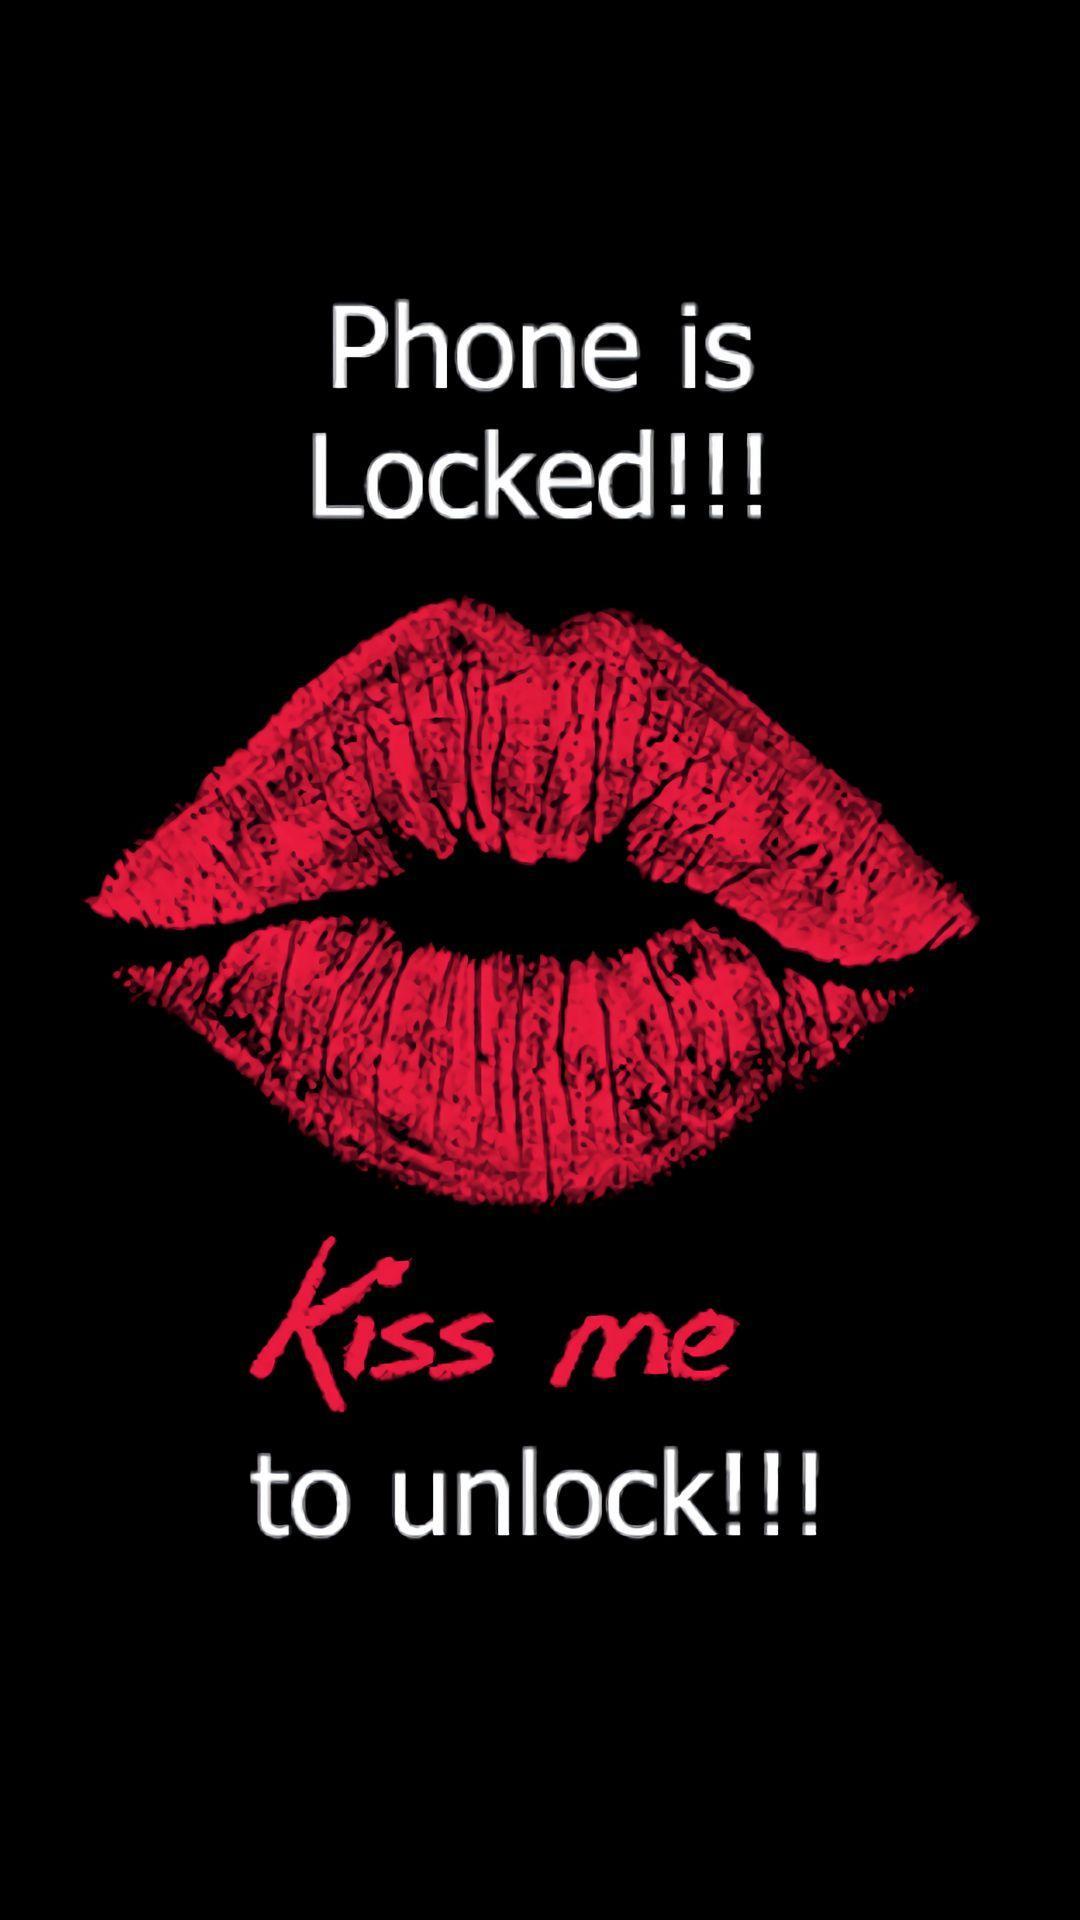 Kiss to see more locked phone wallpaper!